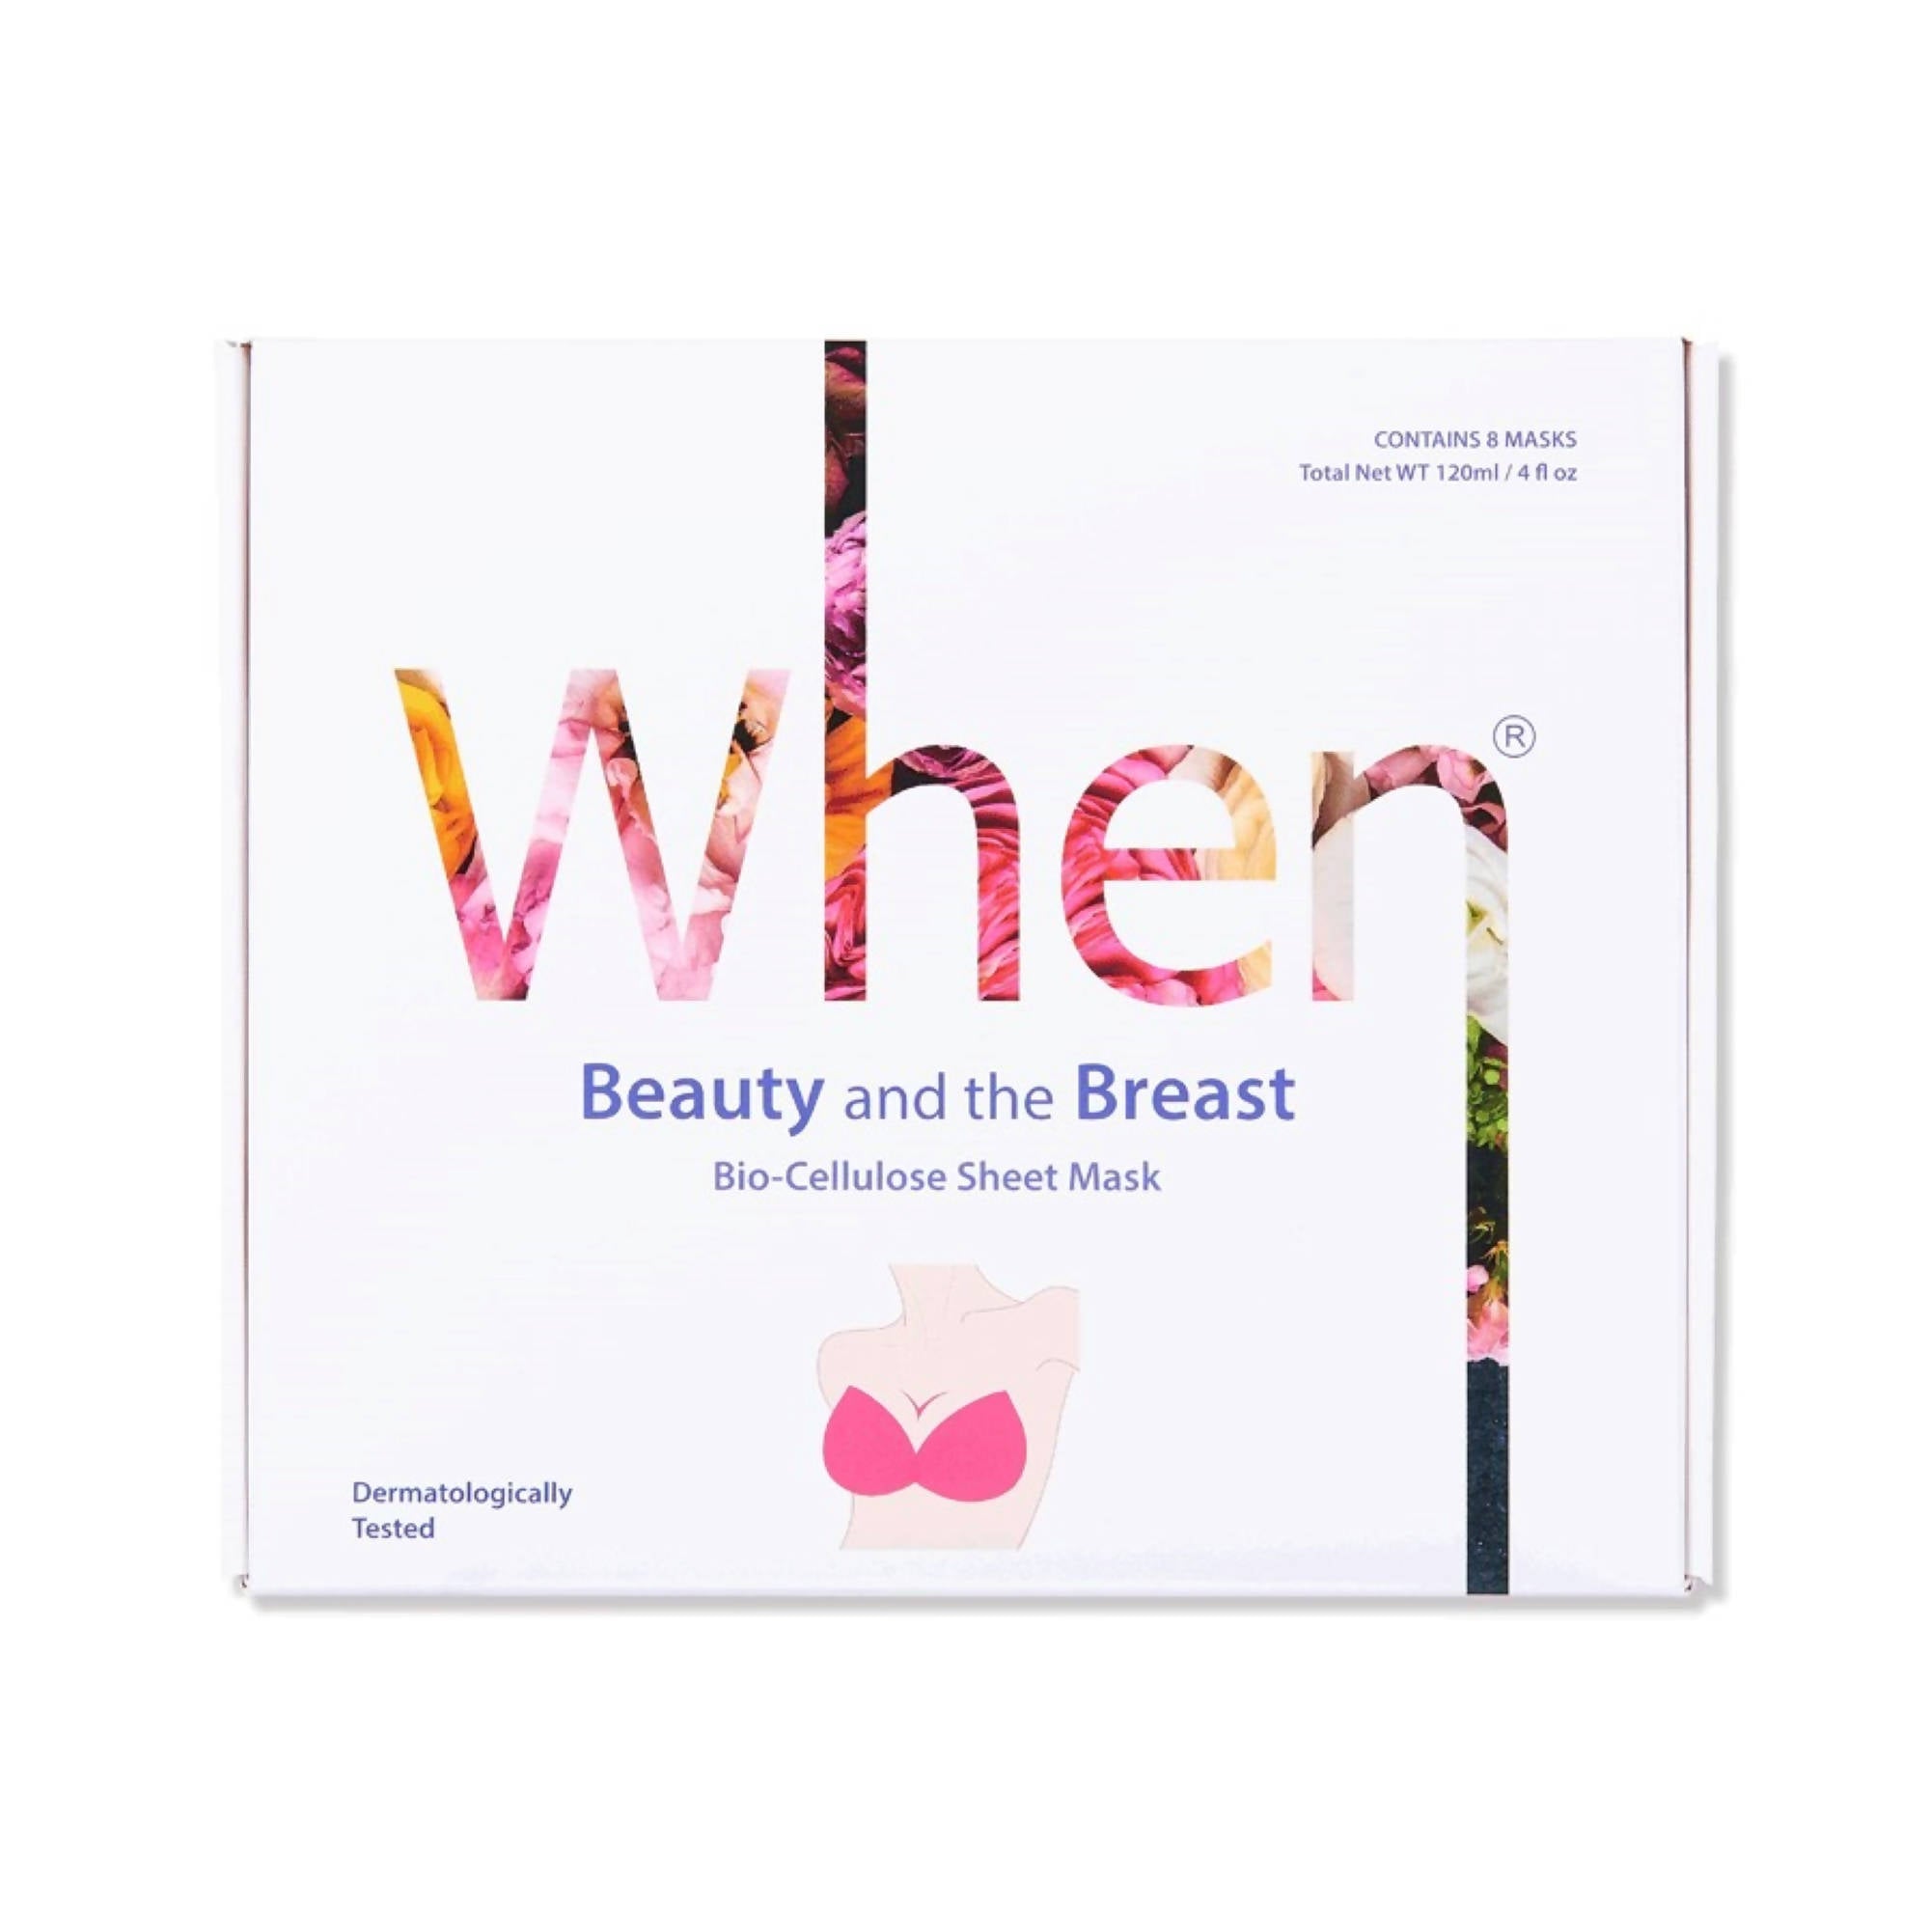 [When] Beauty and the Breast Bio-Cellulose Sheet Mask, Breast Mask (8 pcs, 4 pairs, box set)